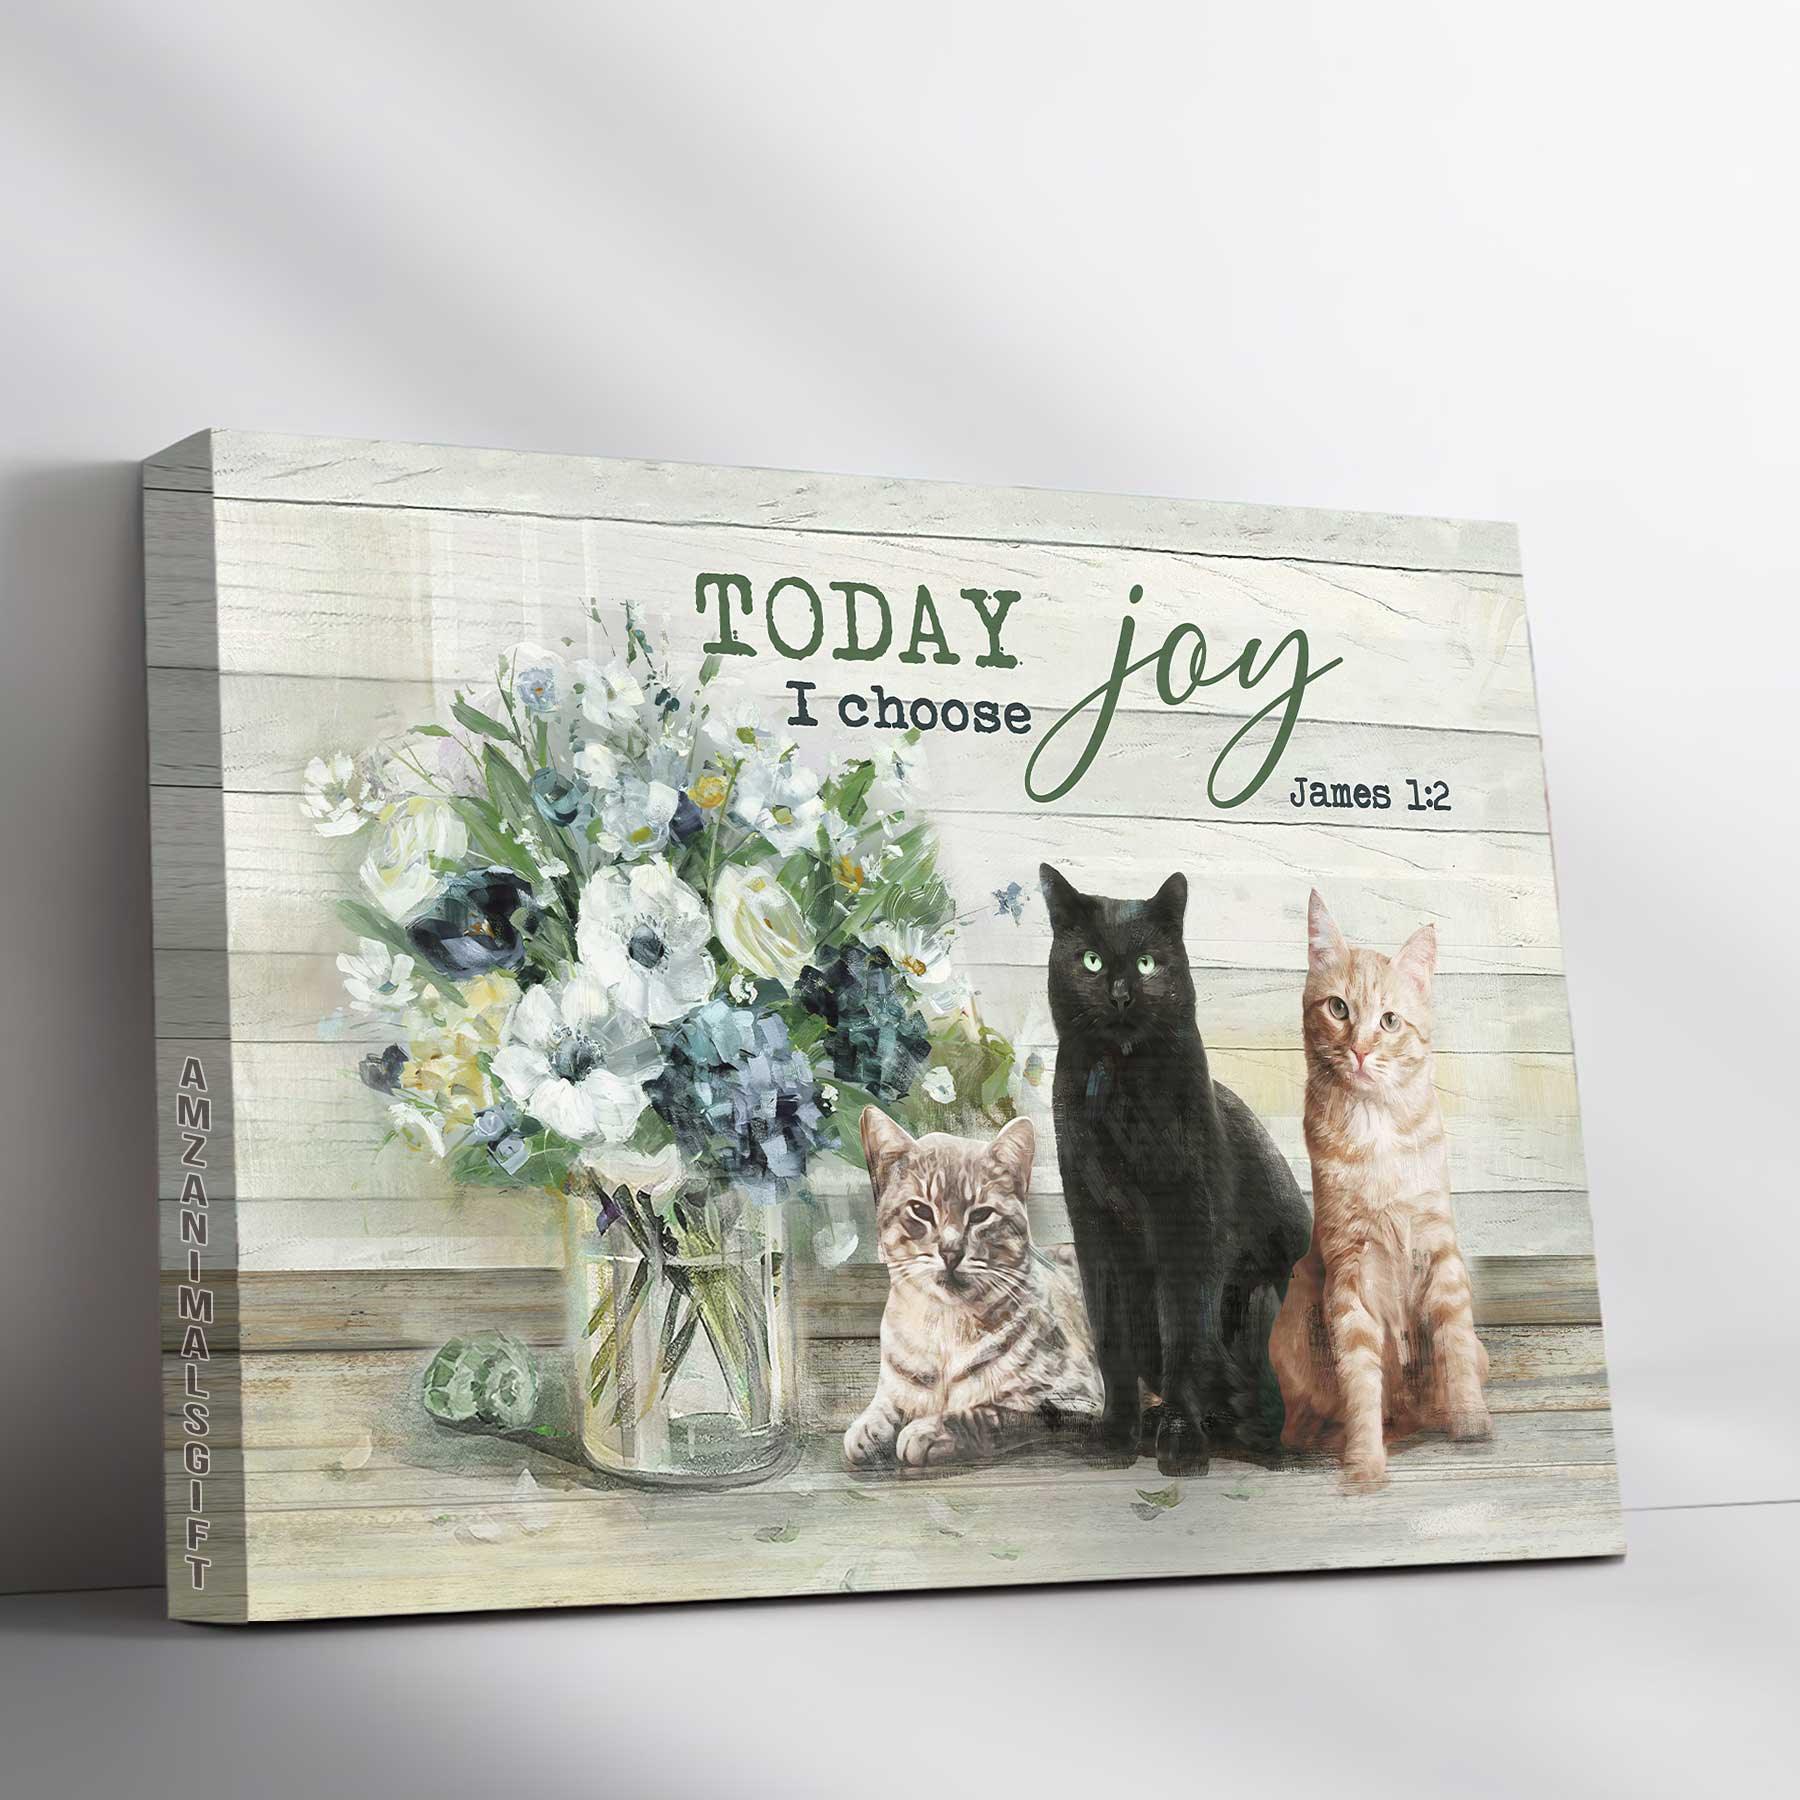 Cat & Jesus Premium Wrapped Landscape Canvas - Adorable Cats, Flower Vase, Today I Choose Joy - Perfect Gift For Christian, Cat Lovers - Amzanimalsgift